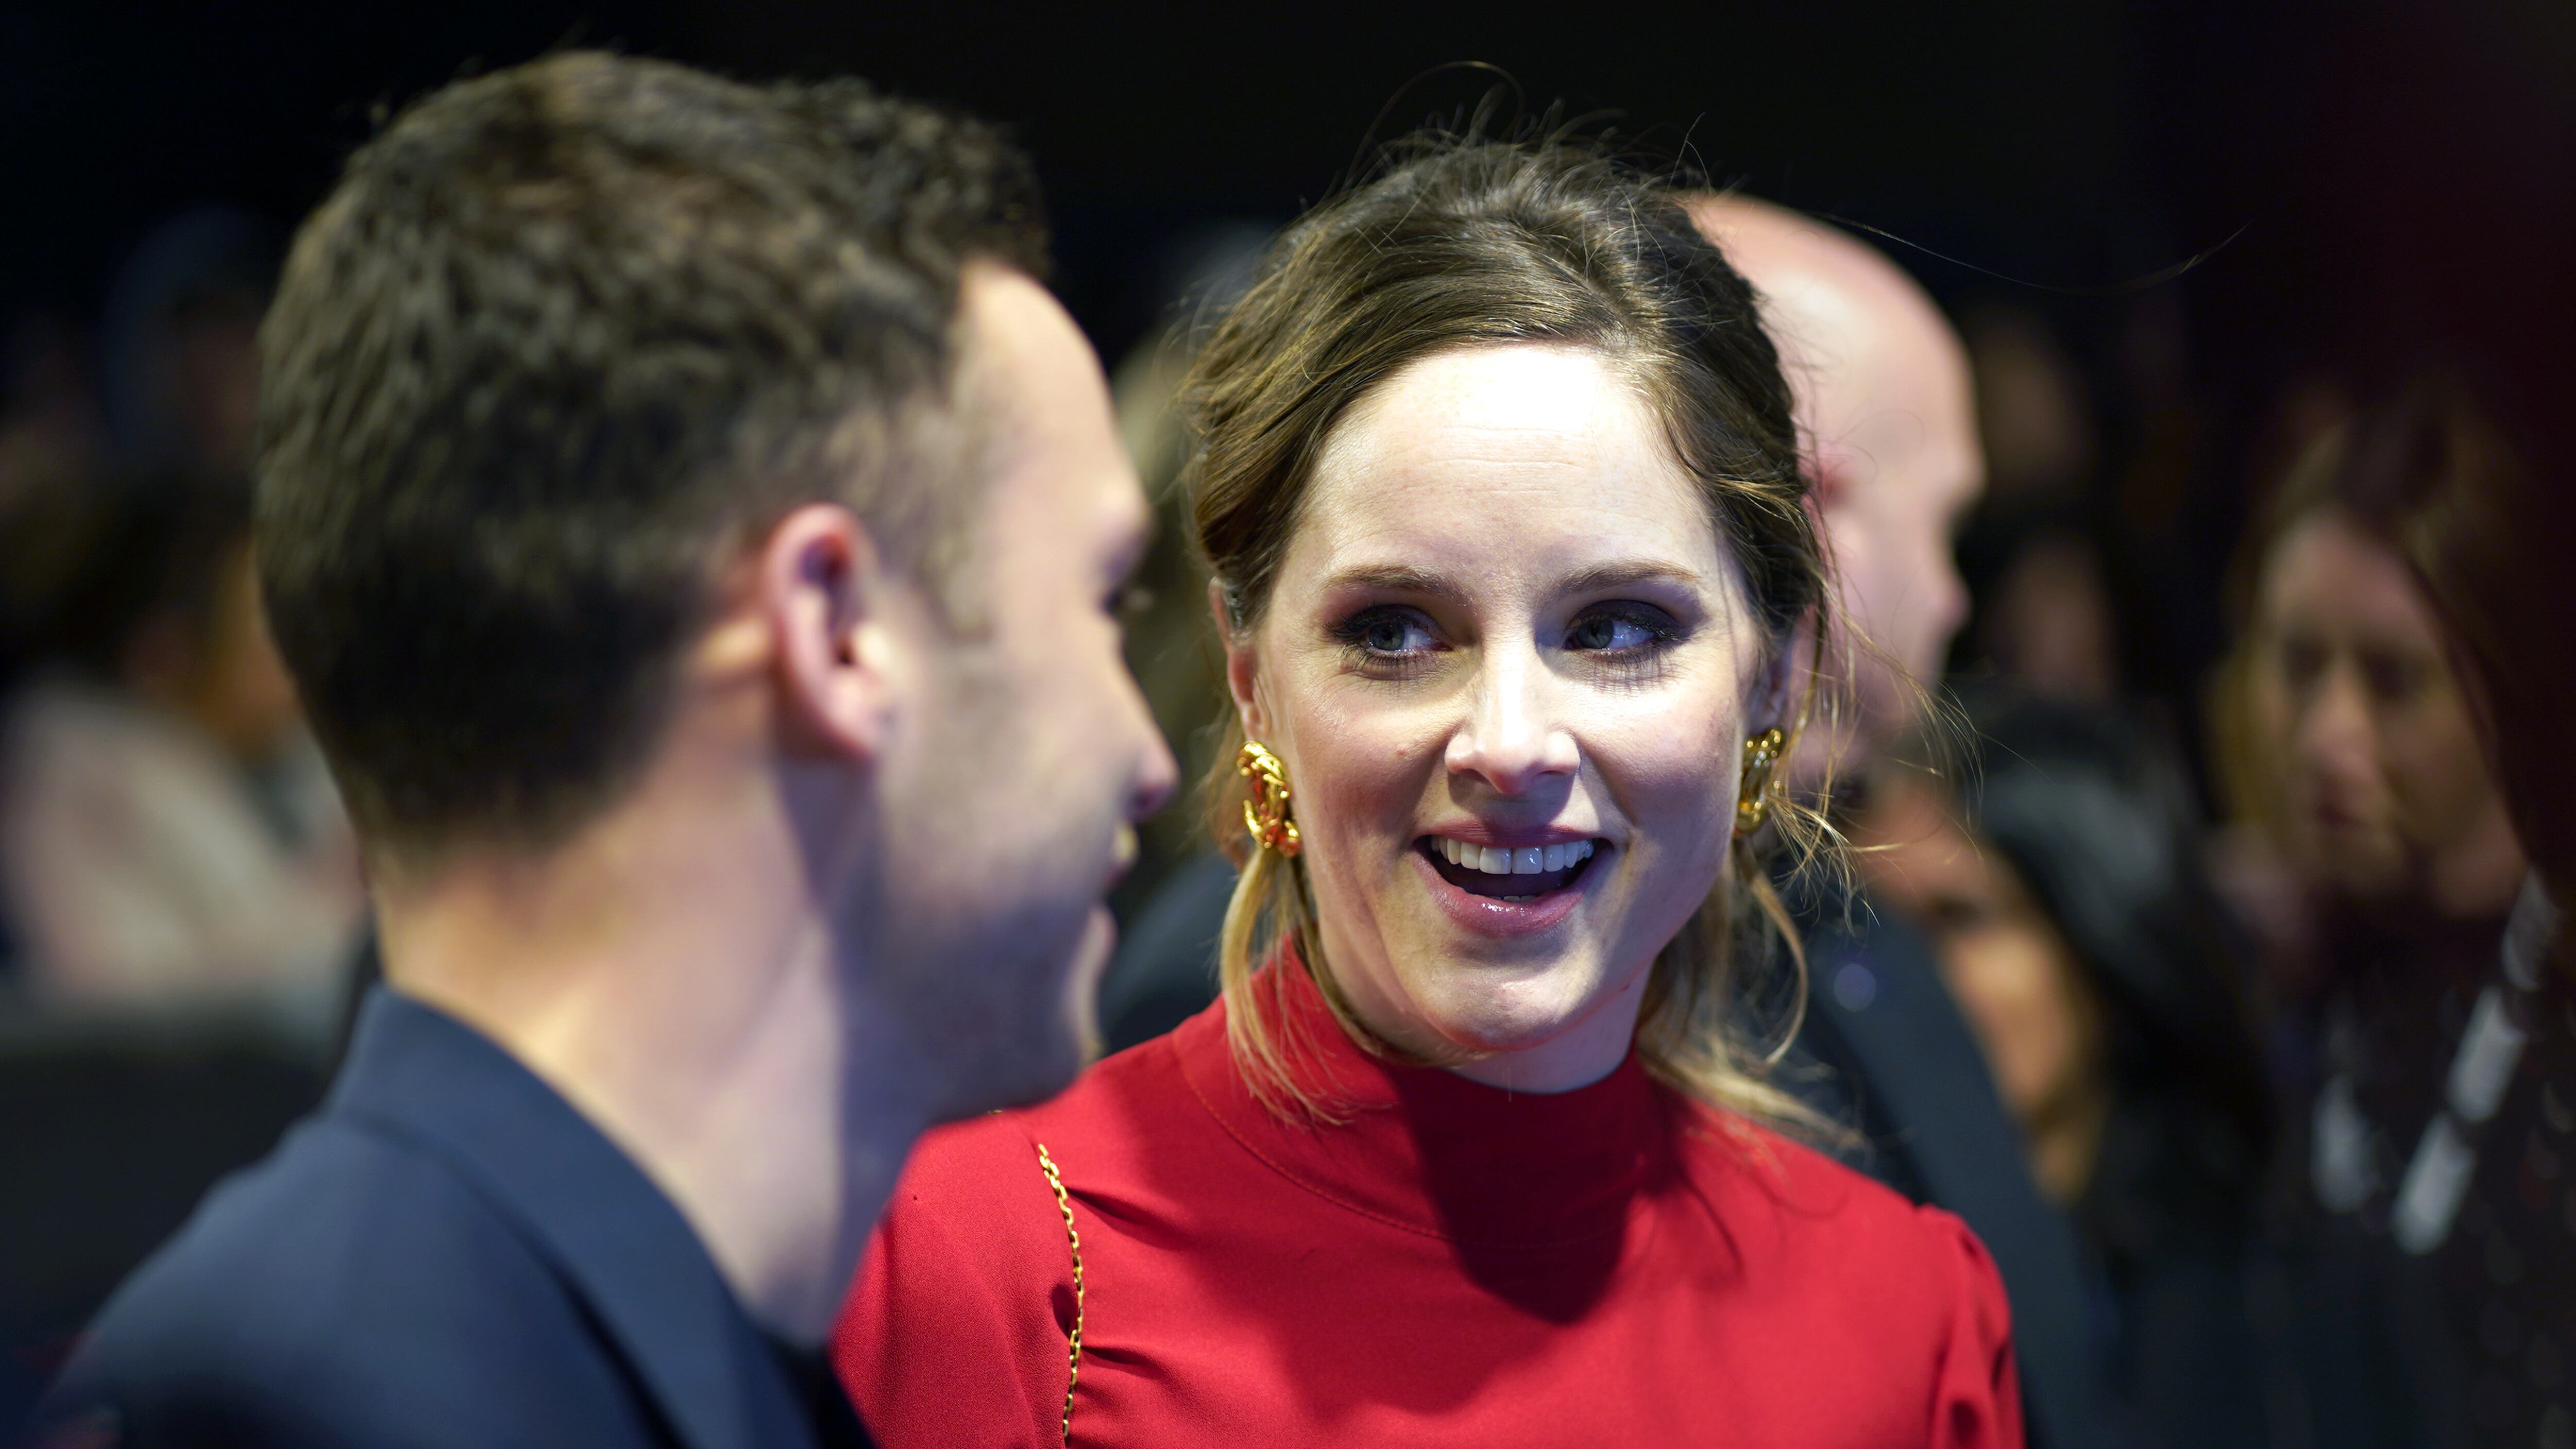 Sophie Rundle has given birth to her second child